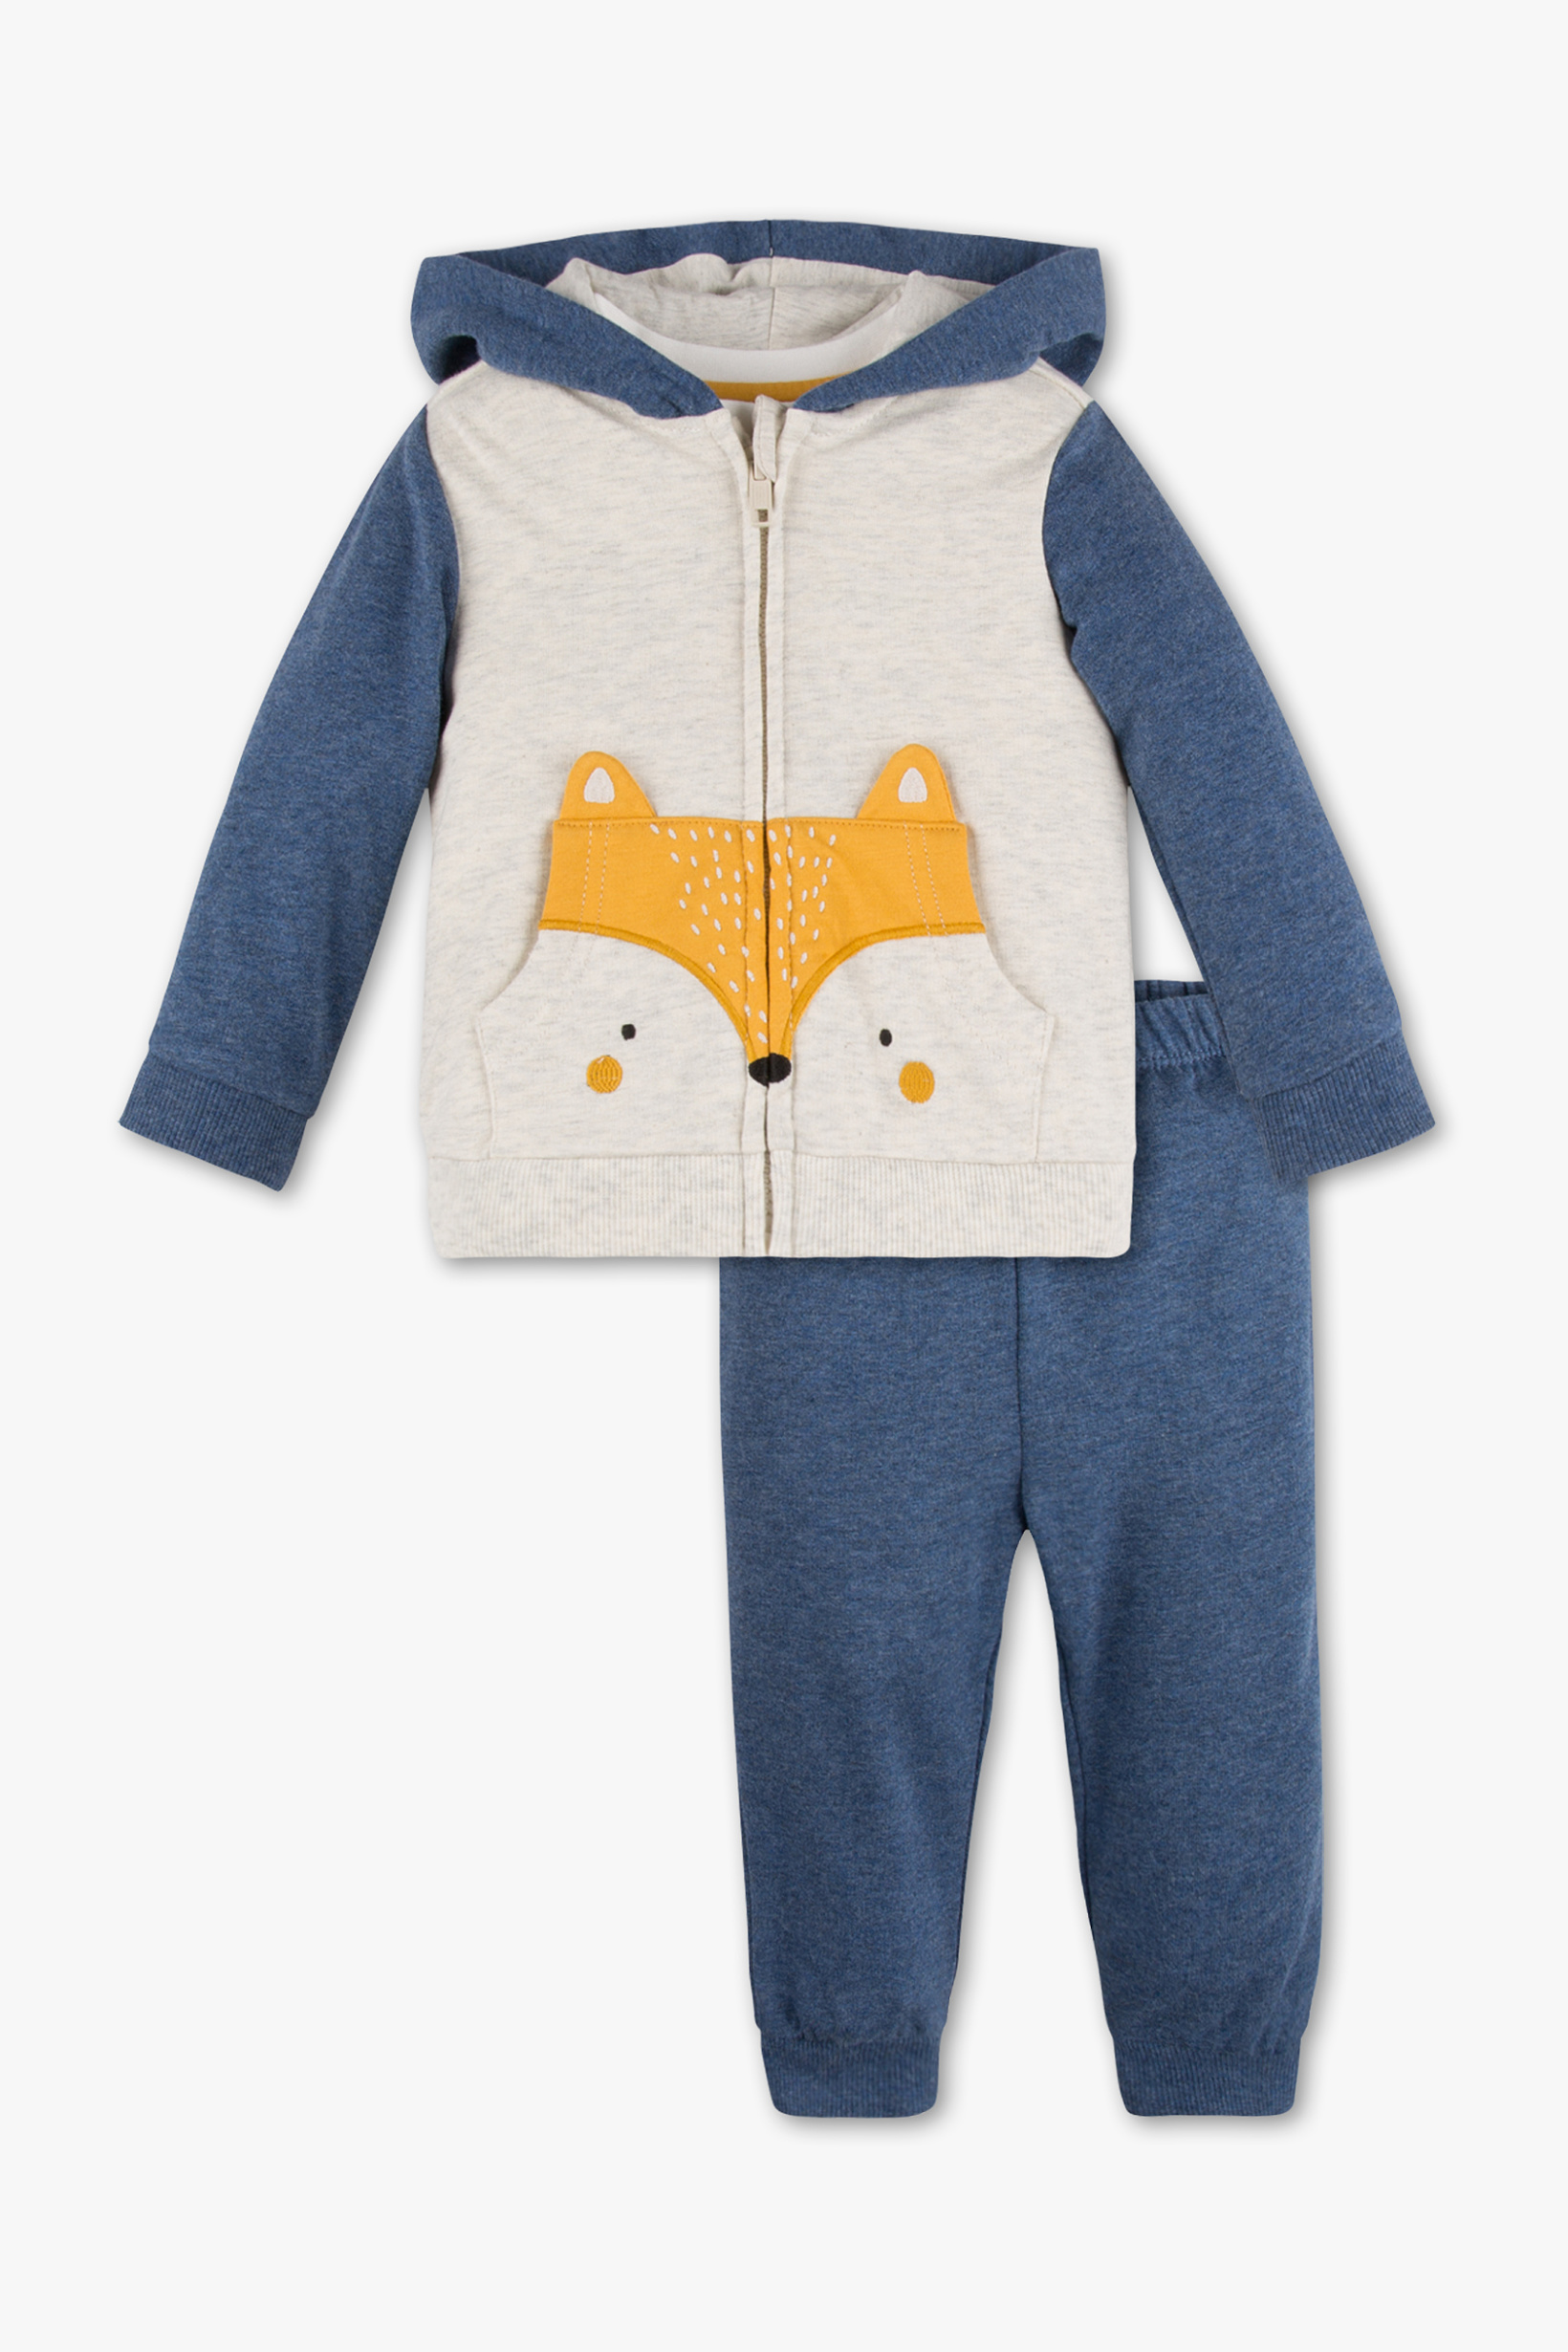 Baby Club Babyoutfit 3-delig